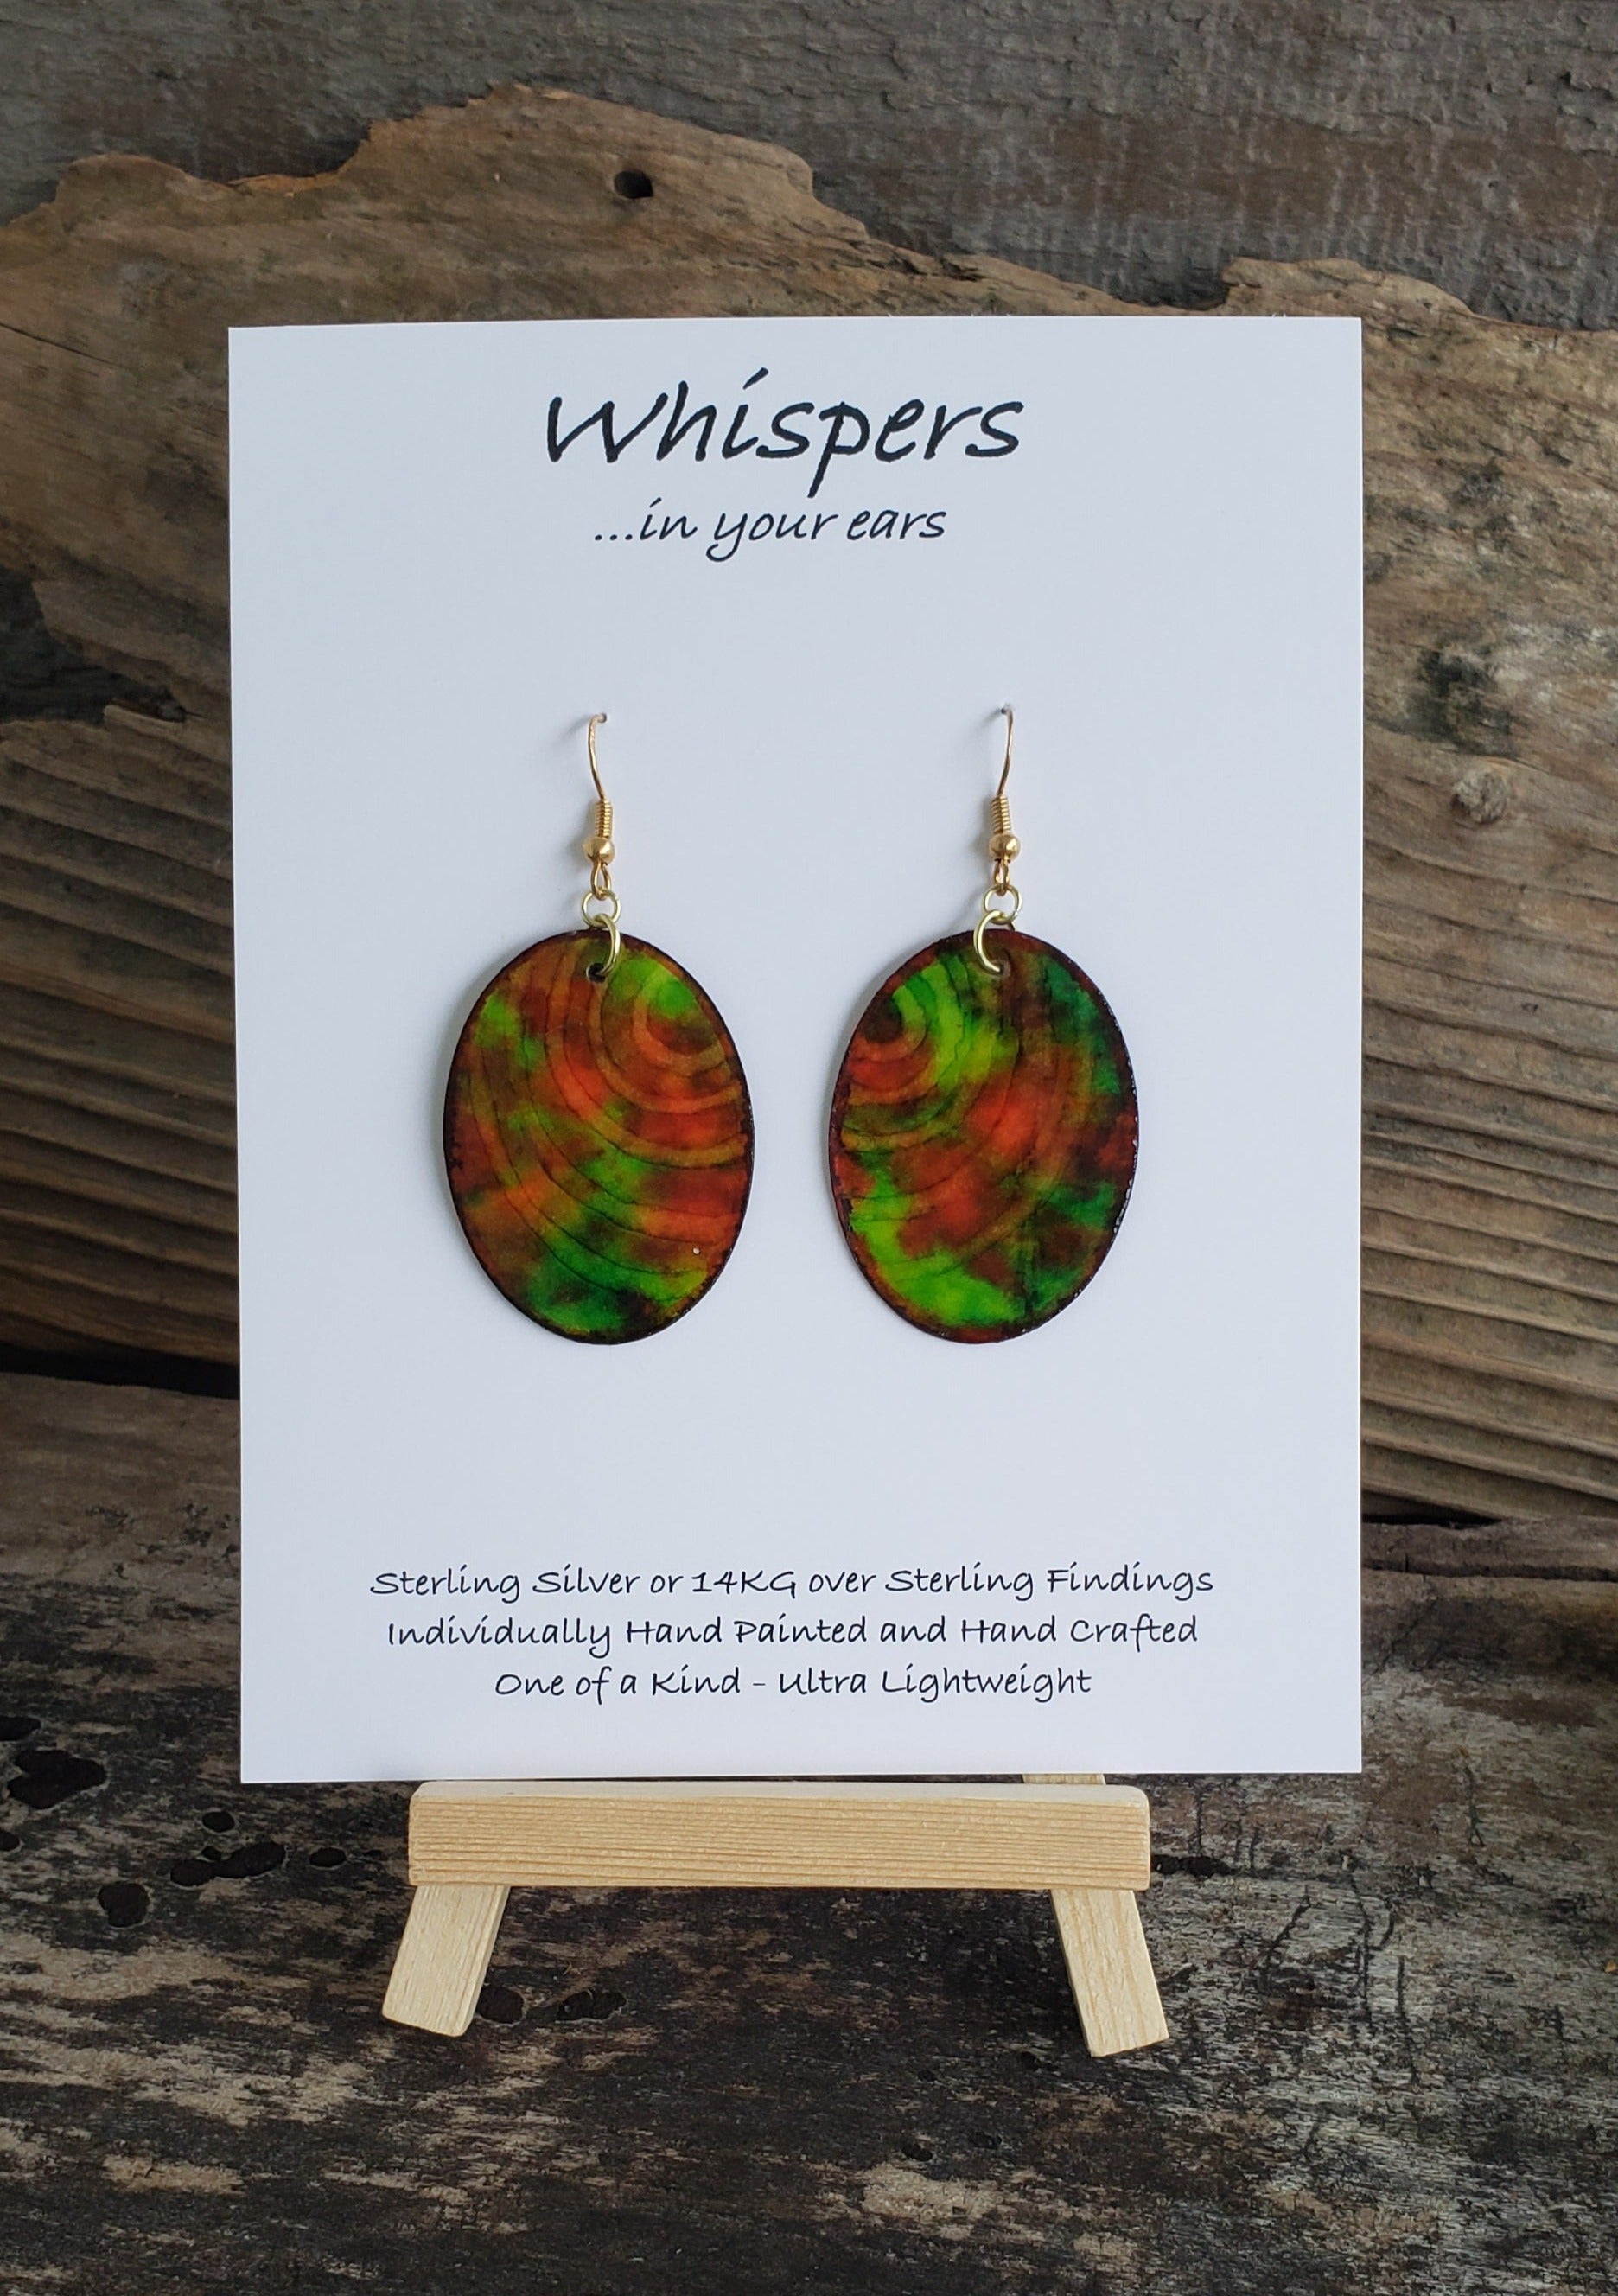 Hand painted watercolor ultra lightweight paper earrings. Shades of red and green with negative space ring lines. Back is painted in a similar complimentary colors. Oval in shape. Hangs 1 1/4" in Length